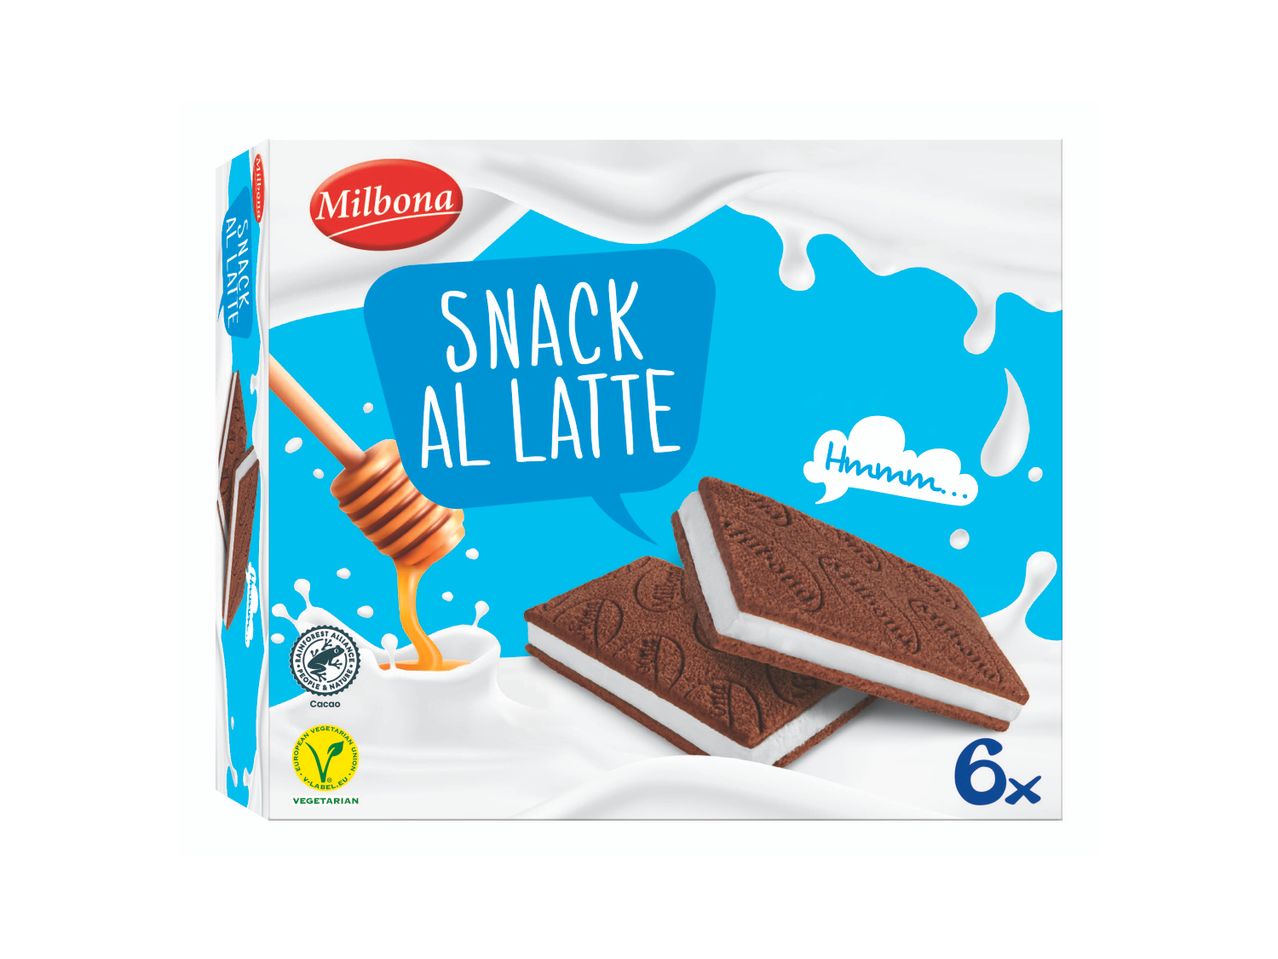 Go to full screen view: Milk Snack - Image 1